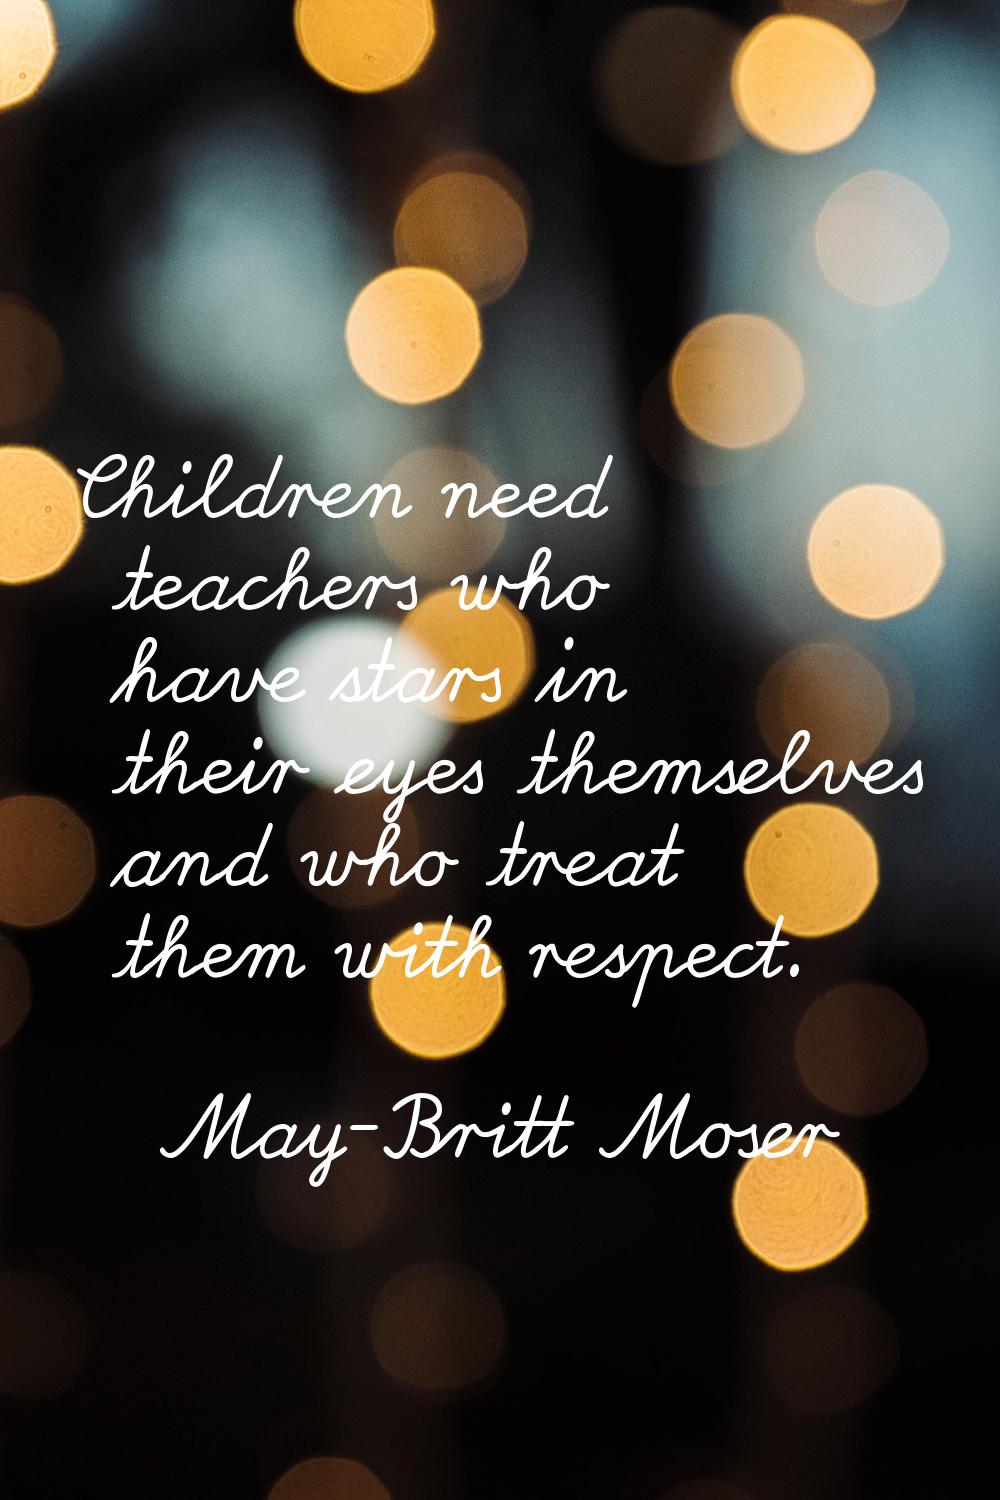 Children need teachers who have stars in their eyes themselves and who treat them with respect.